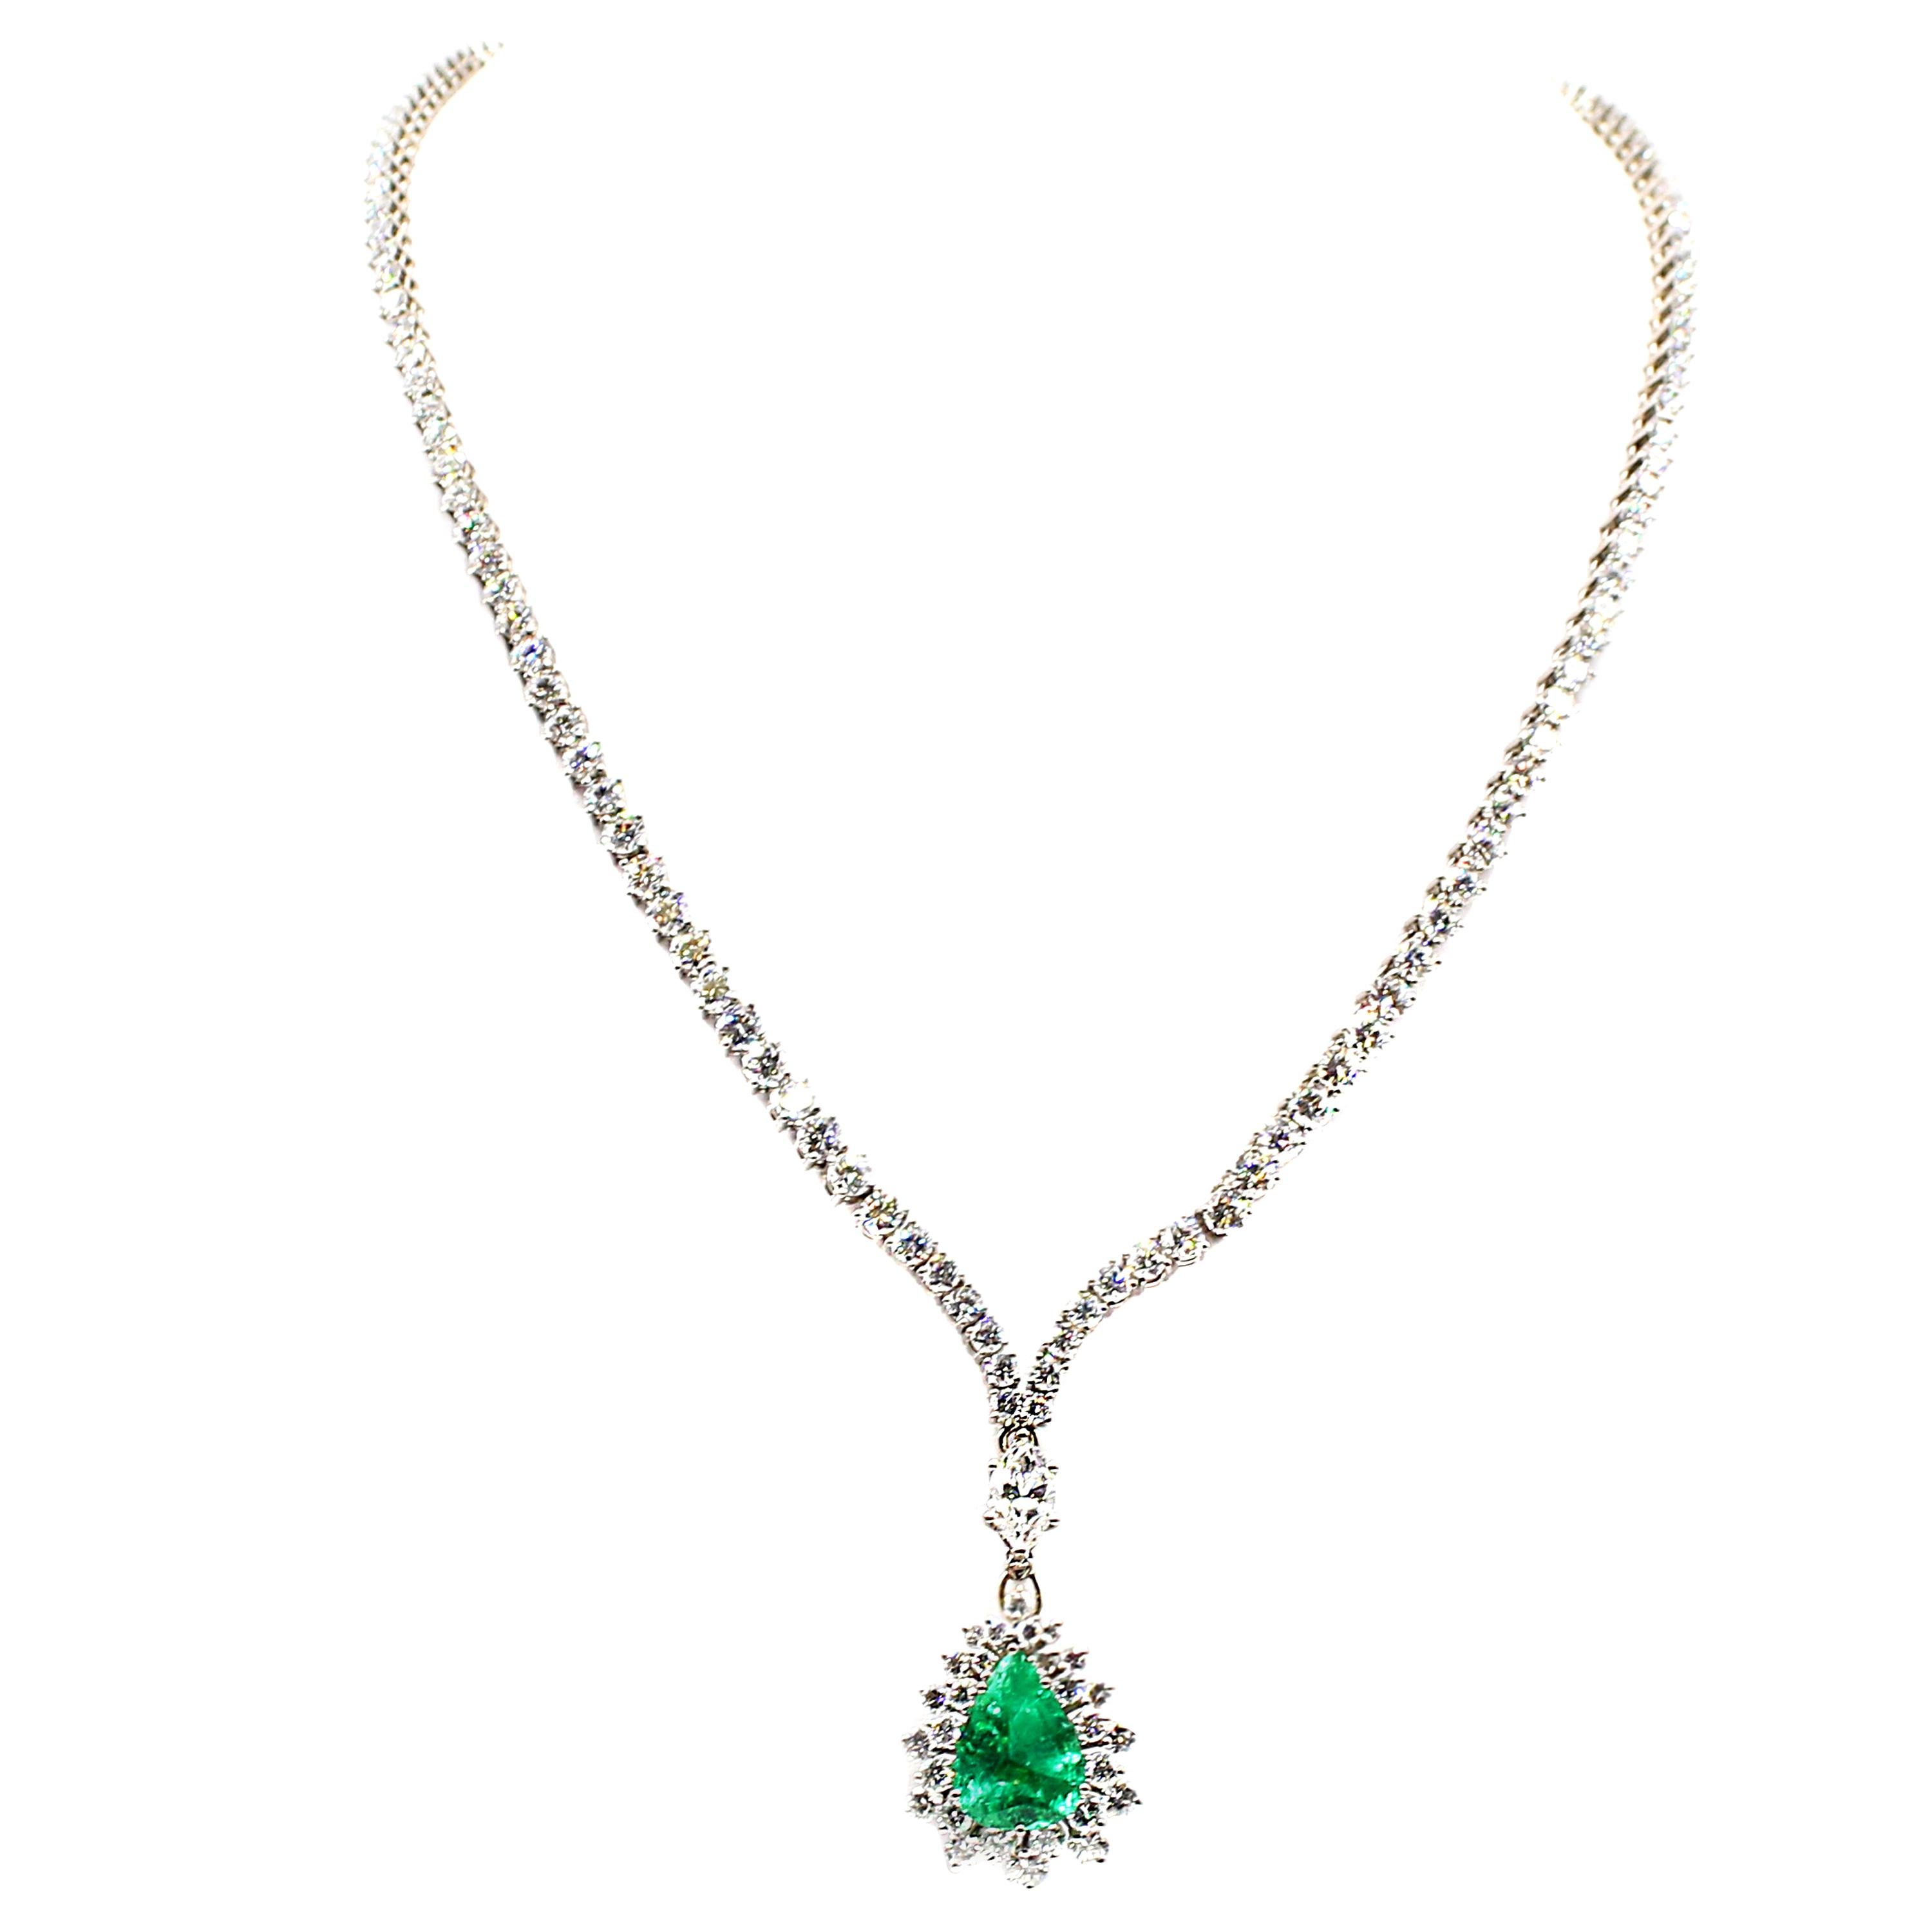 This elegant necklace is a classic, featuring a bright green pear shaped Colombian emerald weighing approximately 4.5 carats. Masterfully hand-crafted in 18 karat white gold this riviera necklace which ends in a V-shape is set with 143 white bright